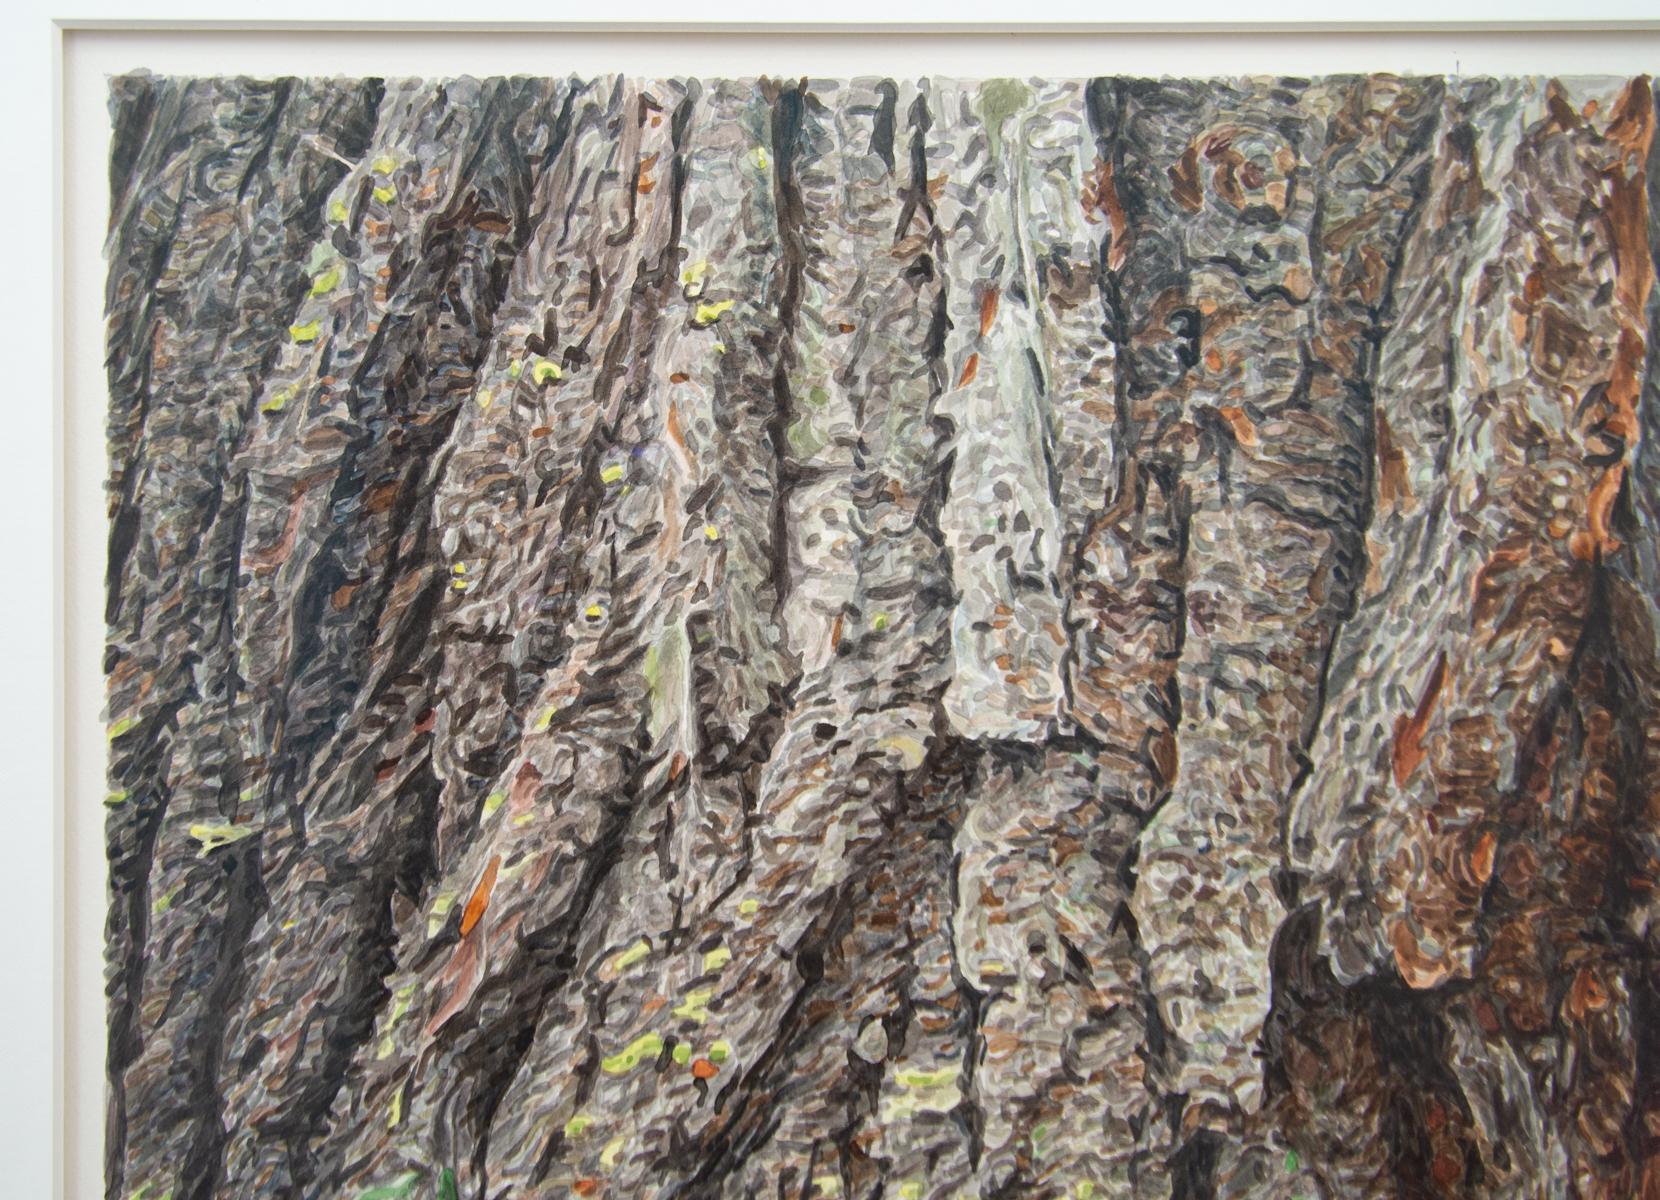 Wiens’s large-scale watercolours take the trees of old growth forests as subject matter. These detailed works appear near-photographic from a distance, giving way to an abstract slur of painted strokes upon closer examination.

The work is framed